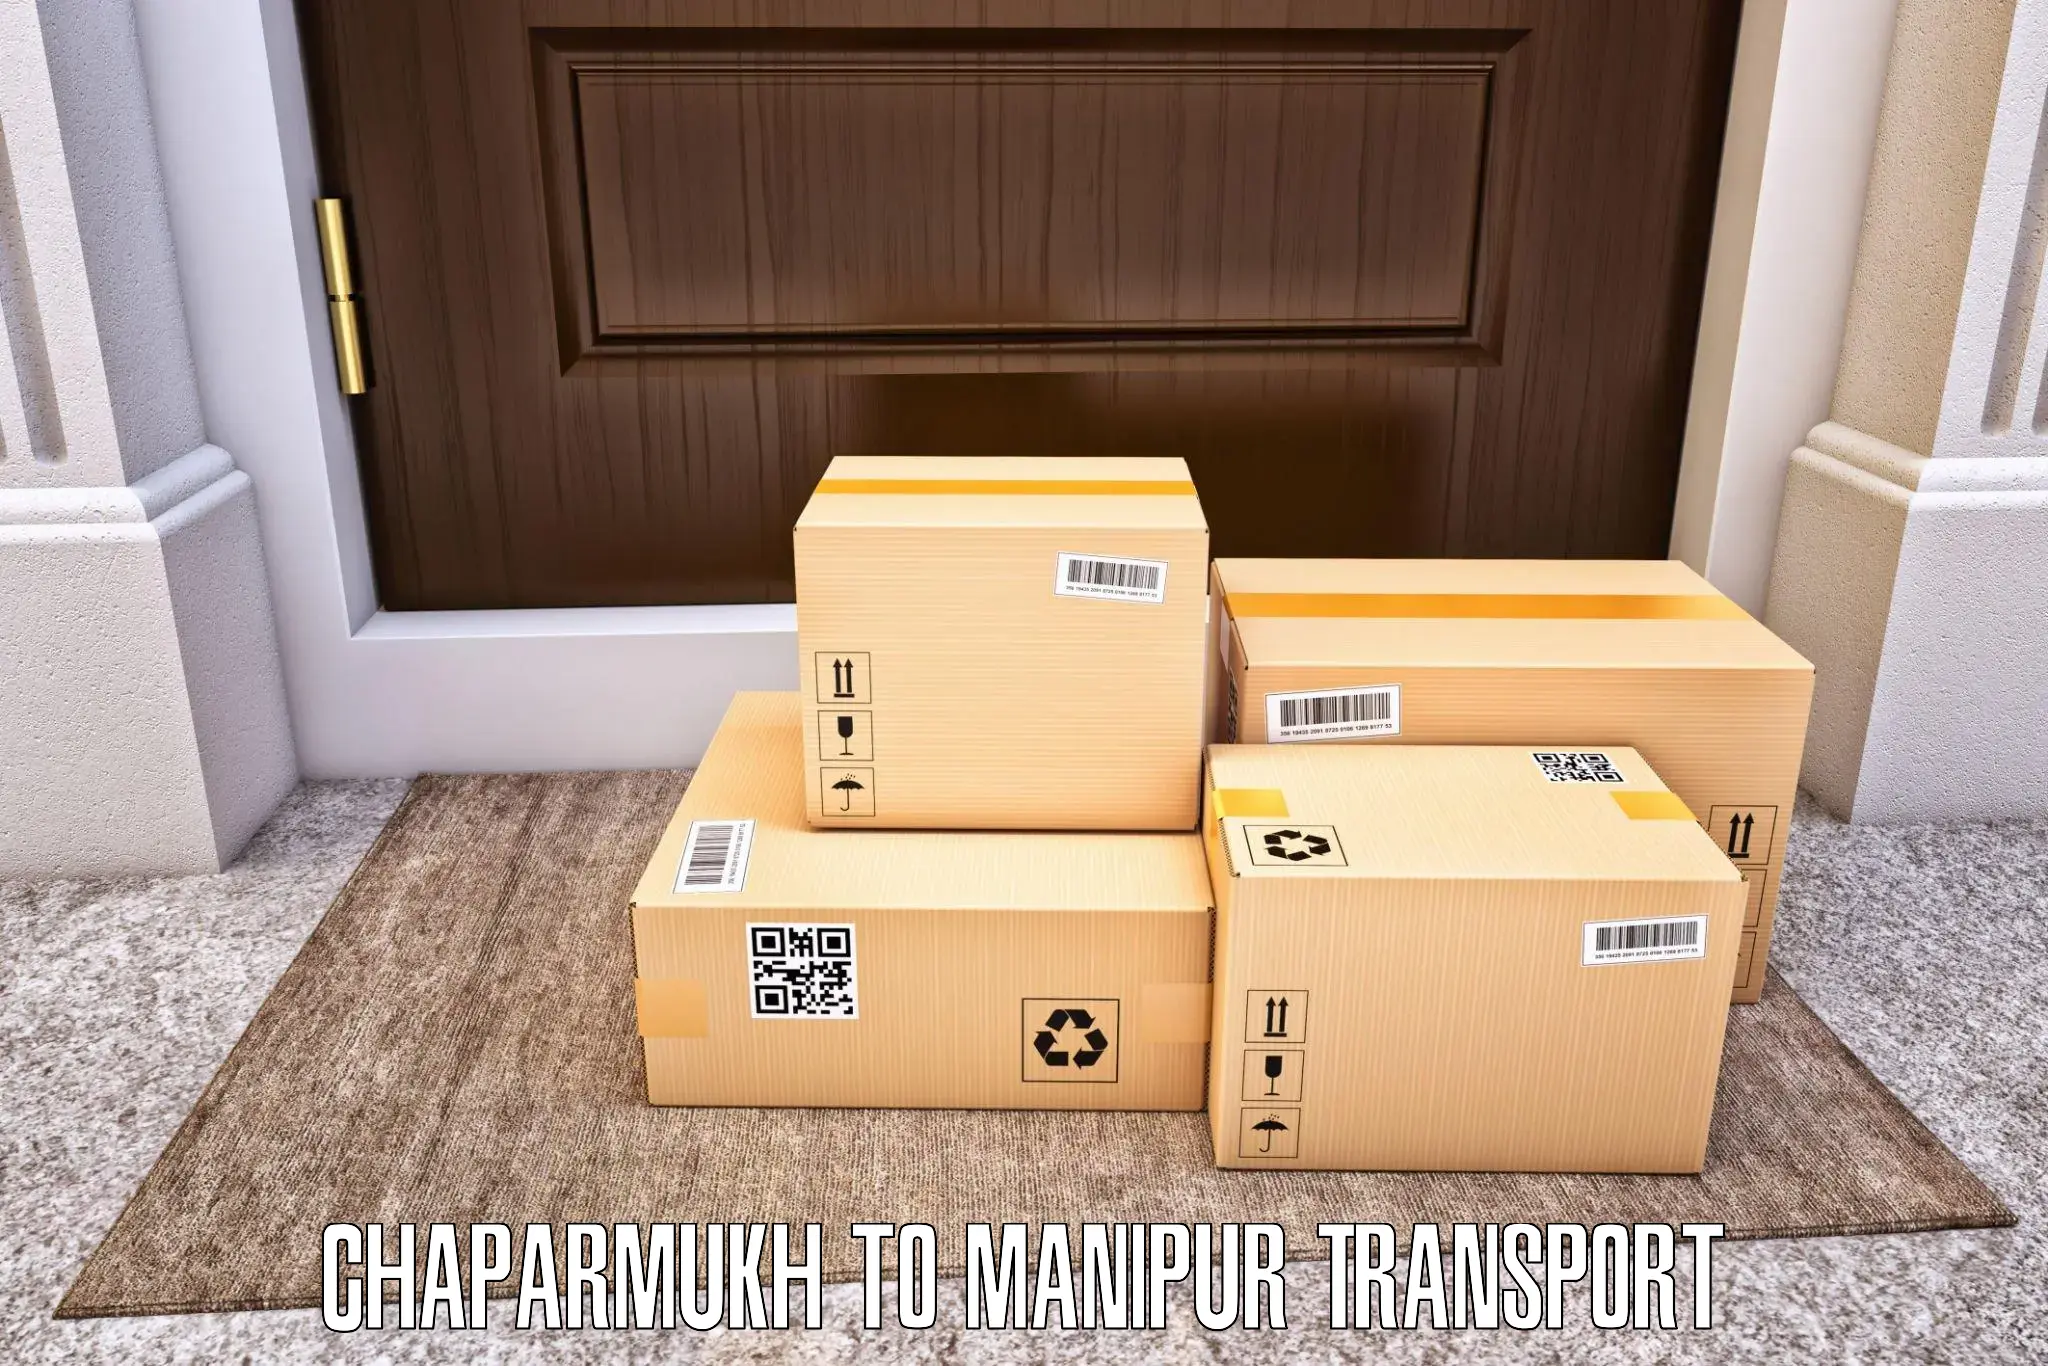 Daily parcel service transport Chaparmukh to Imphal